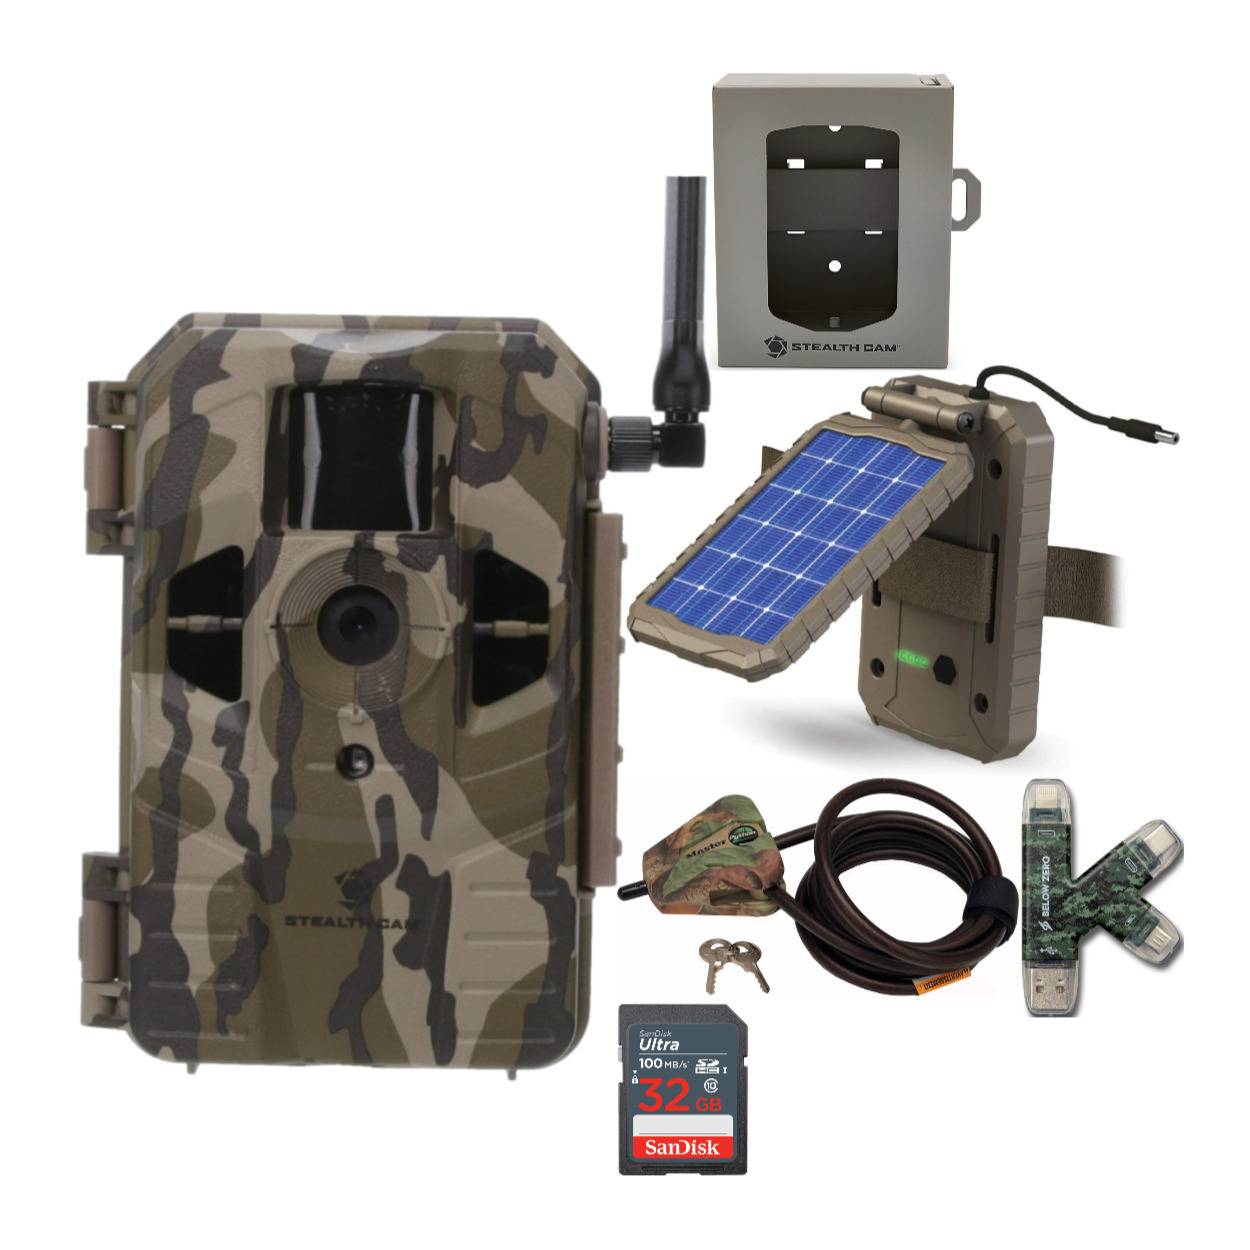 Stealth Cam Connect Cellular Trail Camera (AT&T) with Power Panel and Security Box Bundle